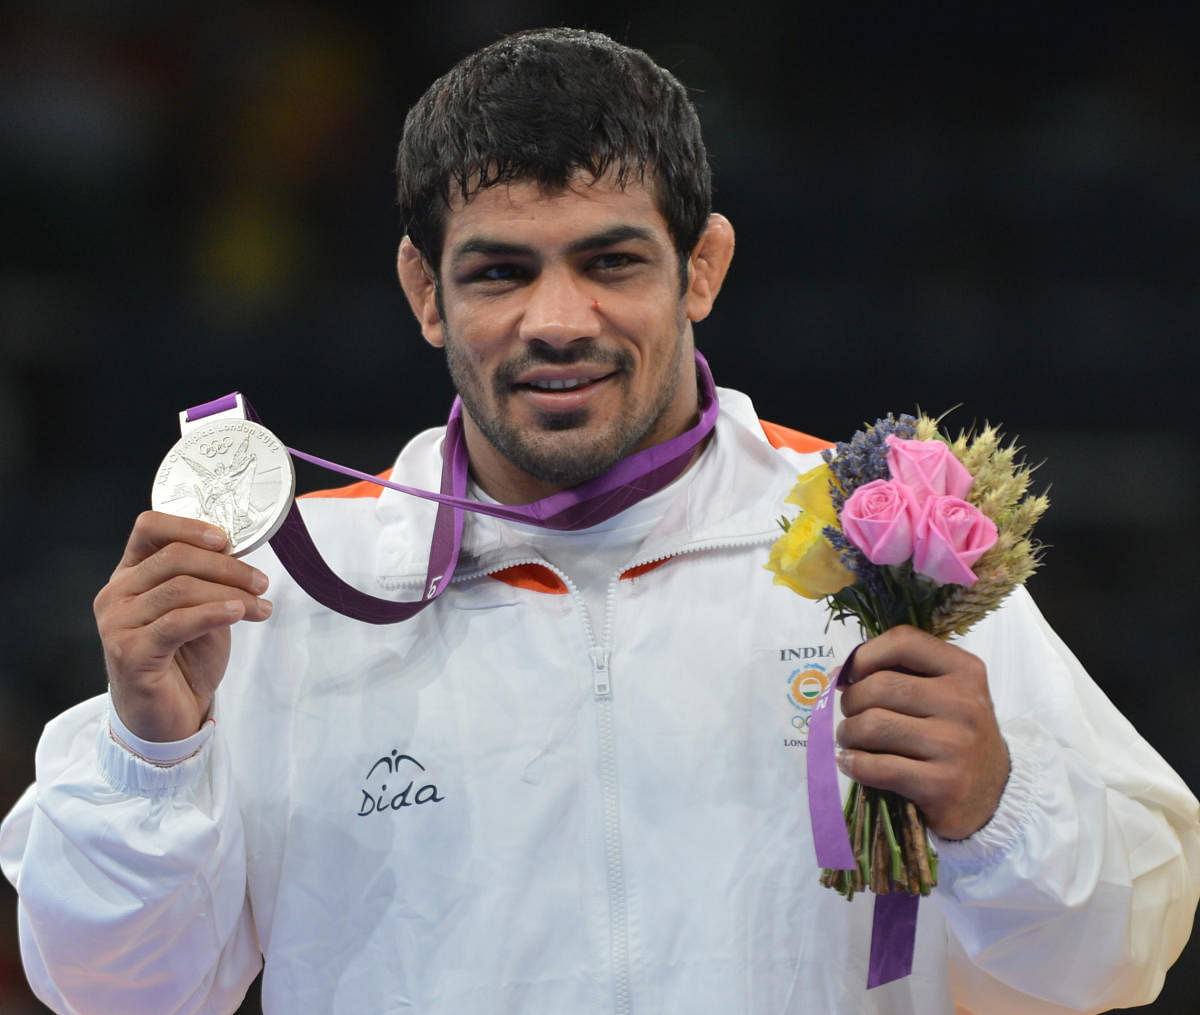 Wrestler Sushil Kumar, who won a silver medal in London Olympics in 2012, has been booked by the Delhi police on Saturday in connection with his supporters clashing with the fans of his rival Praveen Rana, after a bout in Delhi on Friday. DH FILE